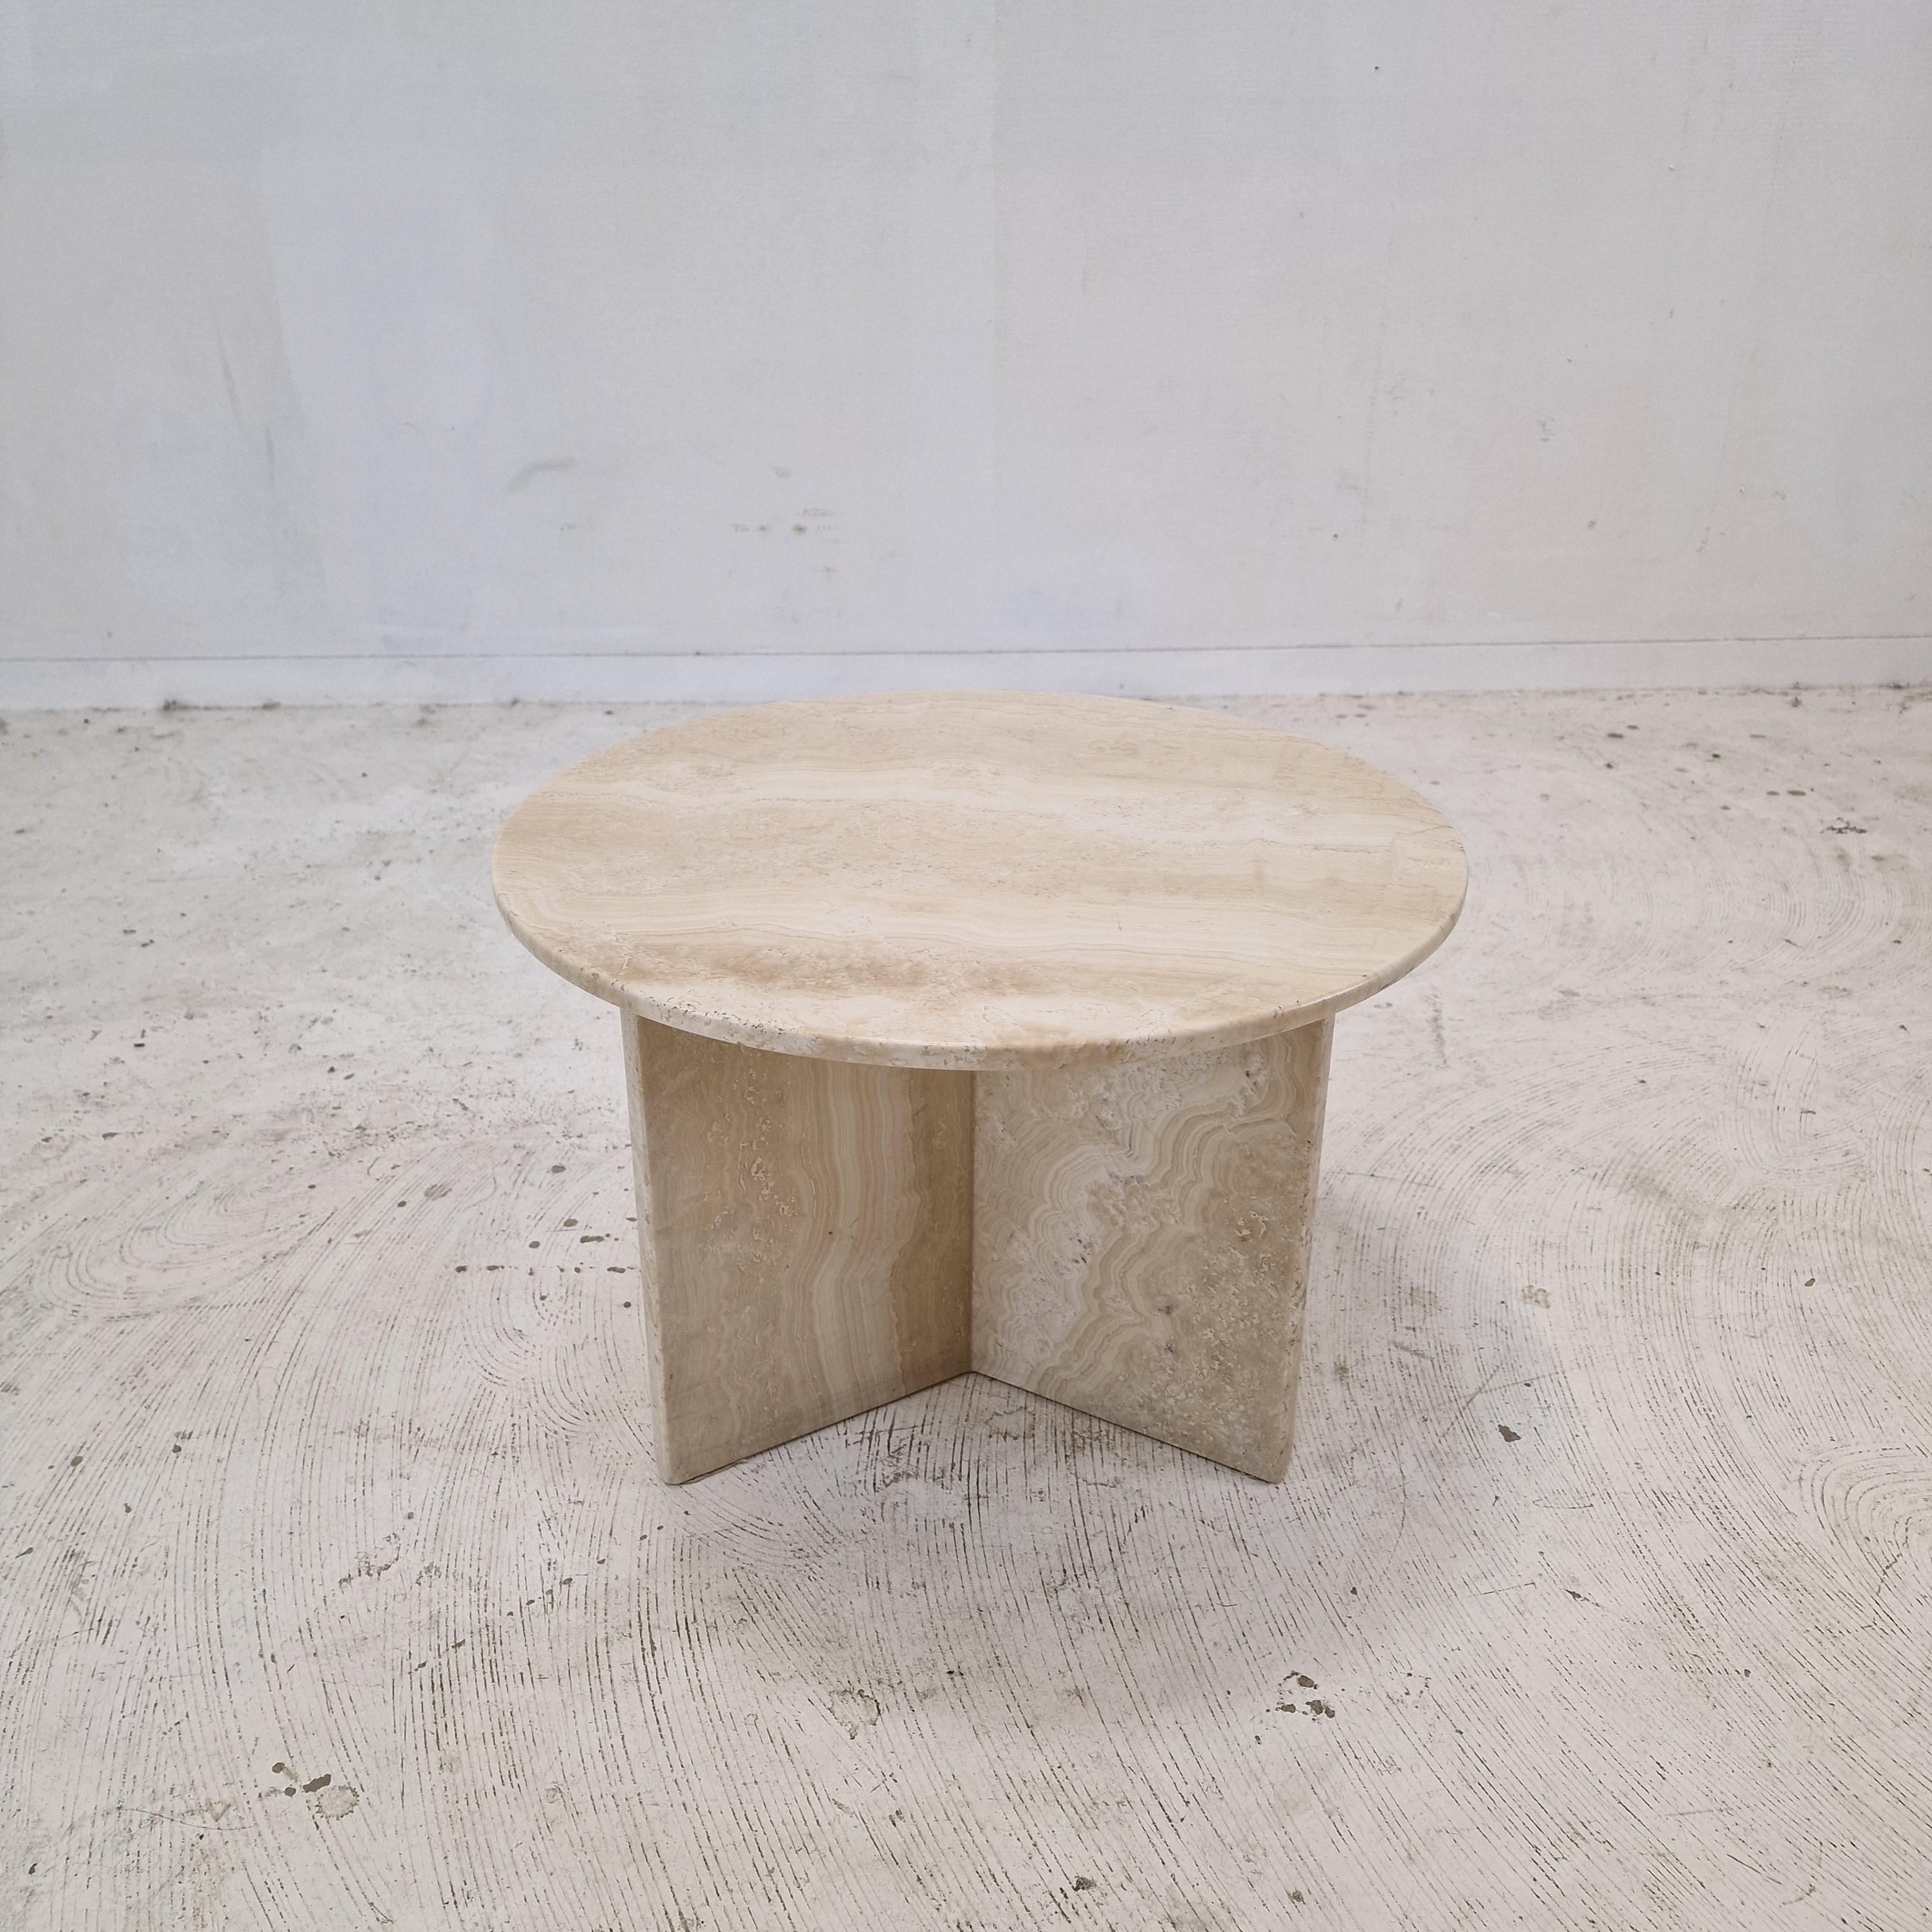 Hand-Crafted Italian Round Coffee or Side Table in Travertine, 1980s For Sale